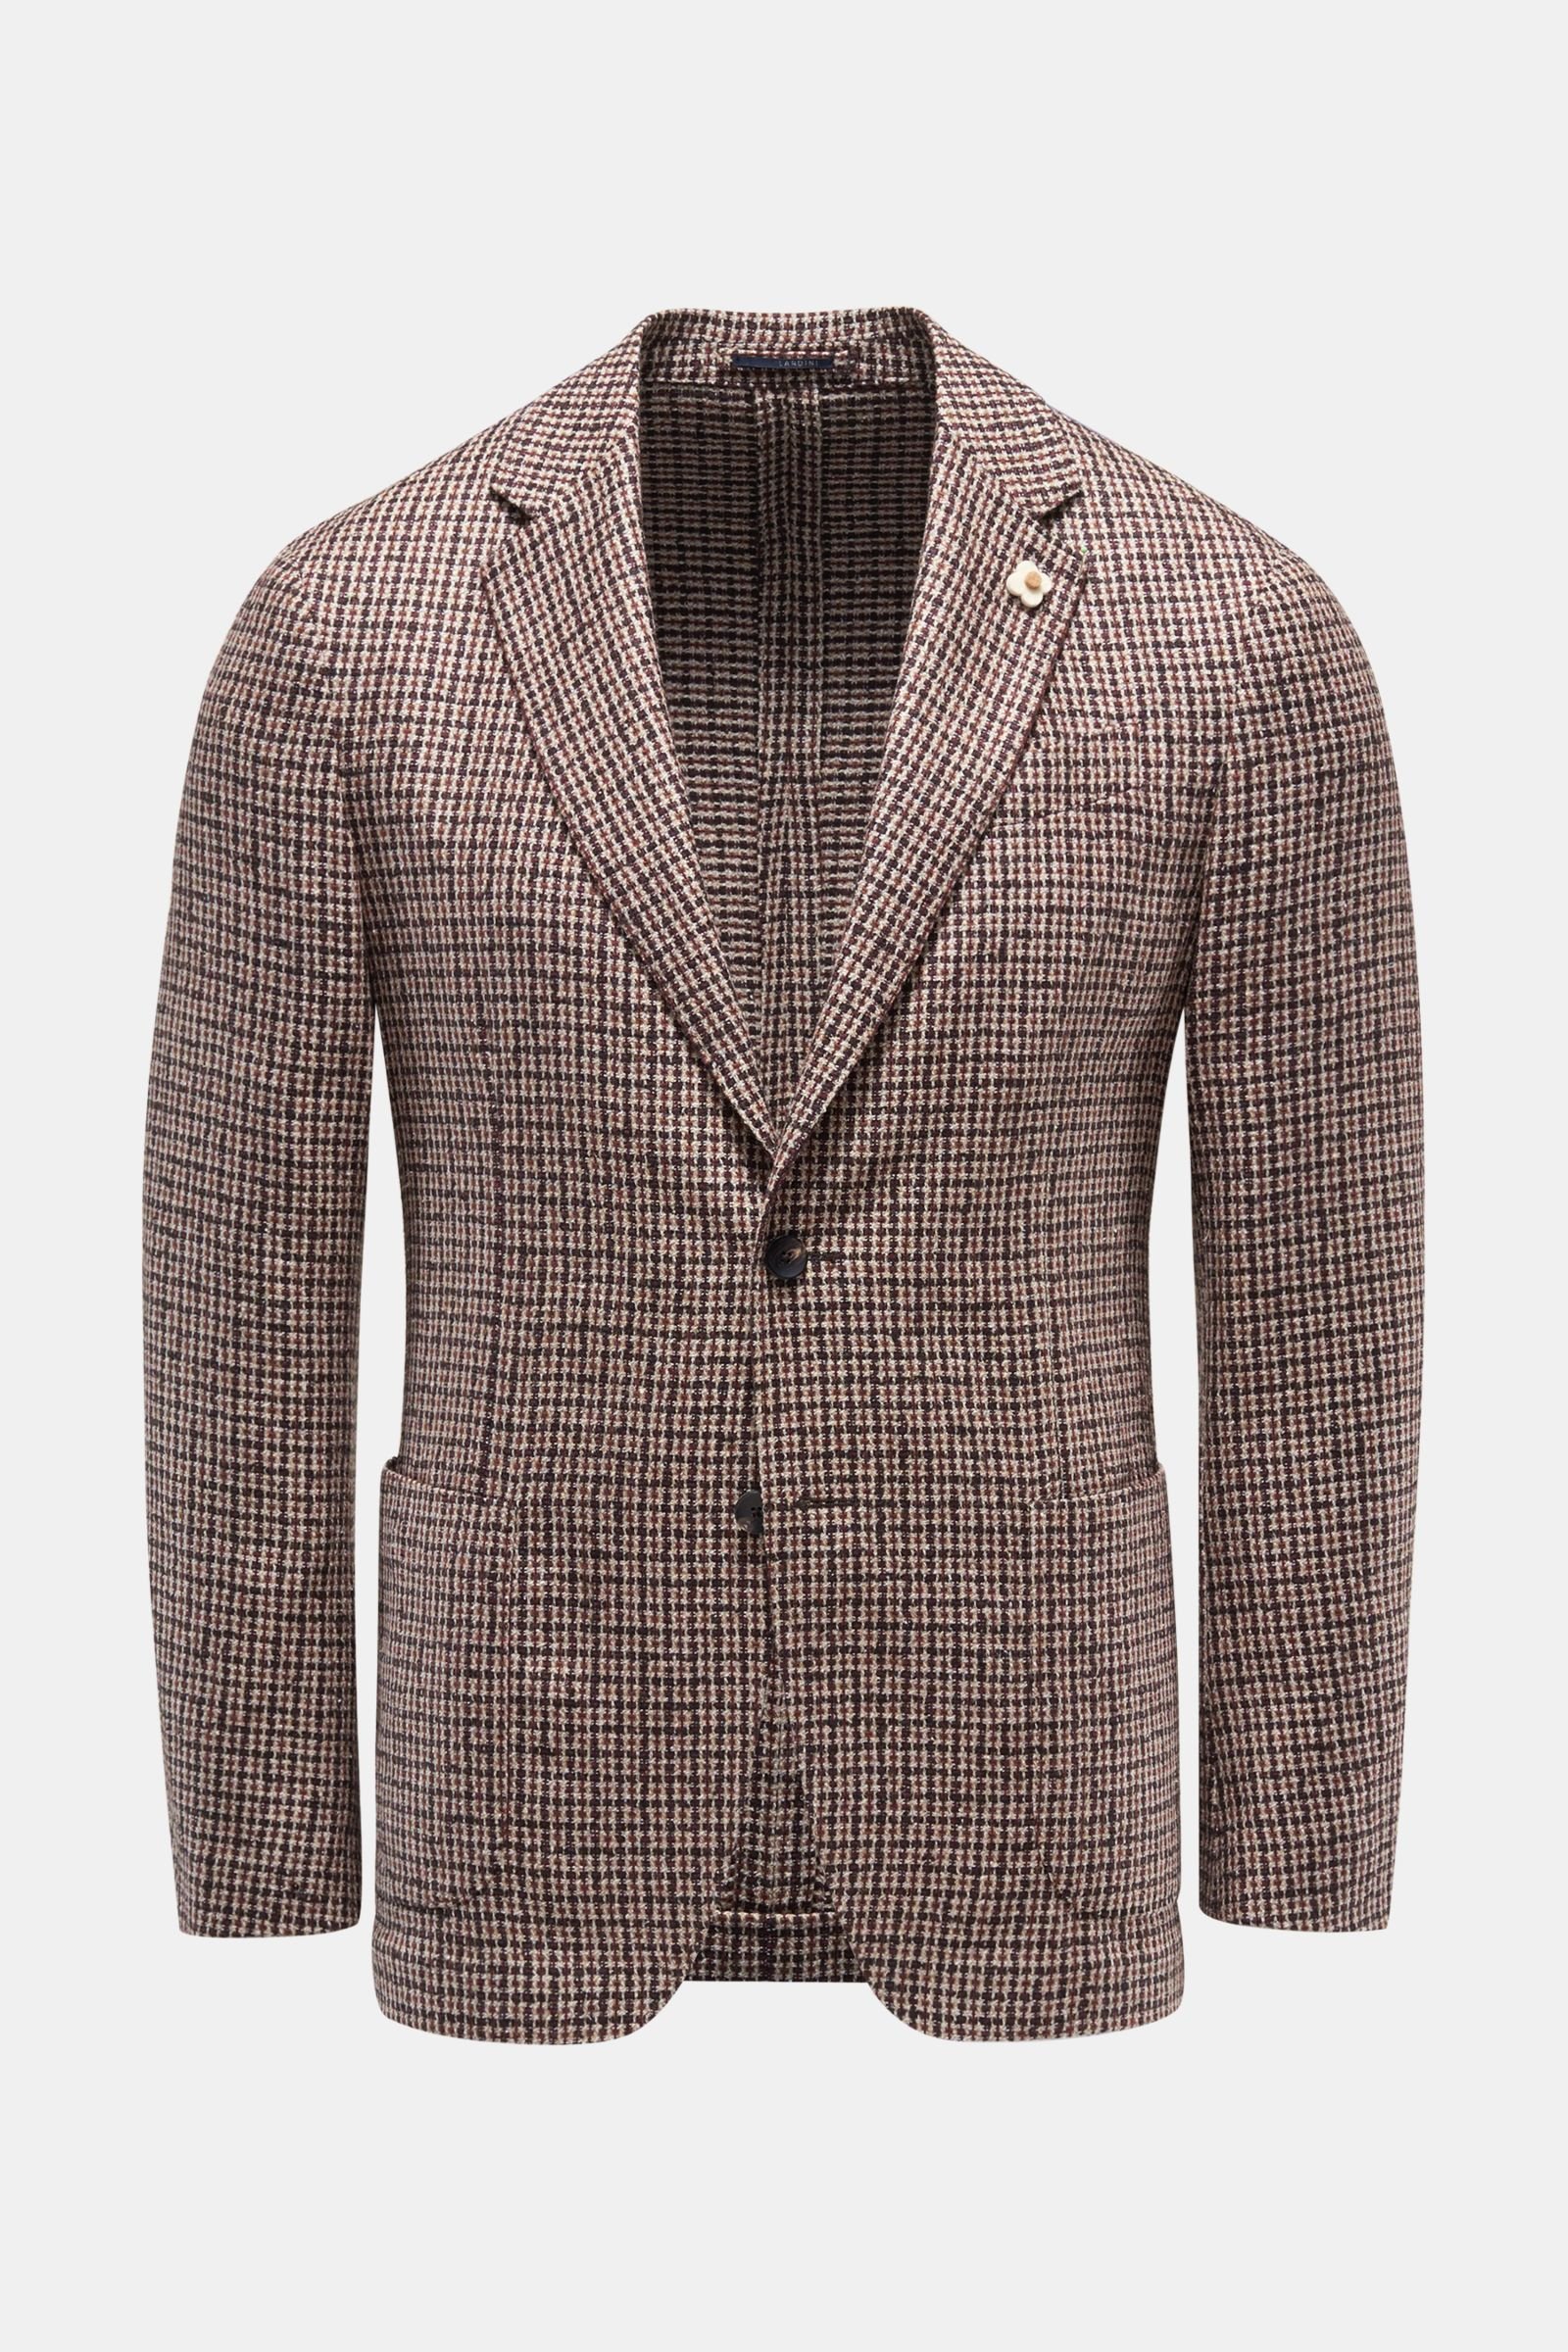 Smart-casual jacket light brown/black checked